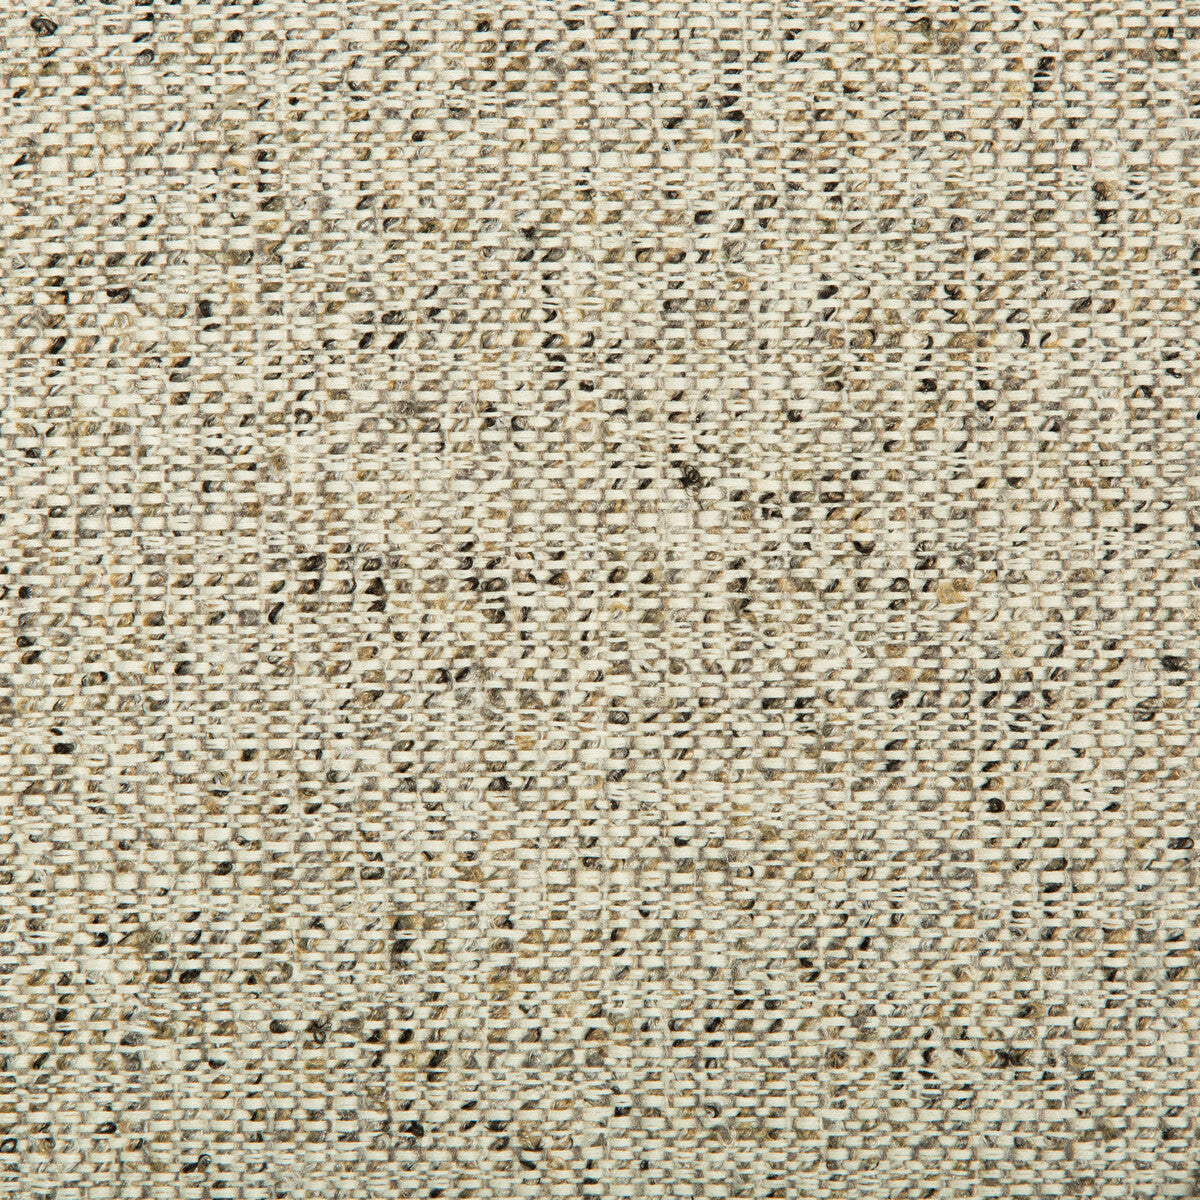 Kravet Smart fabric in 34616-1611 color - pattern 34616.1611.0 - by Kravet Smart in the Performance Crypton Home collection